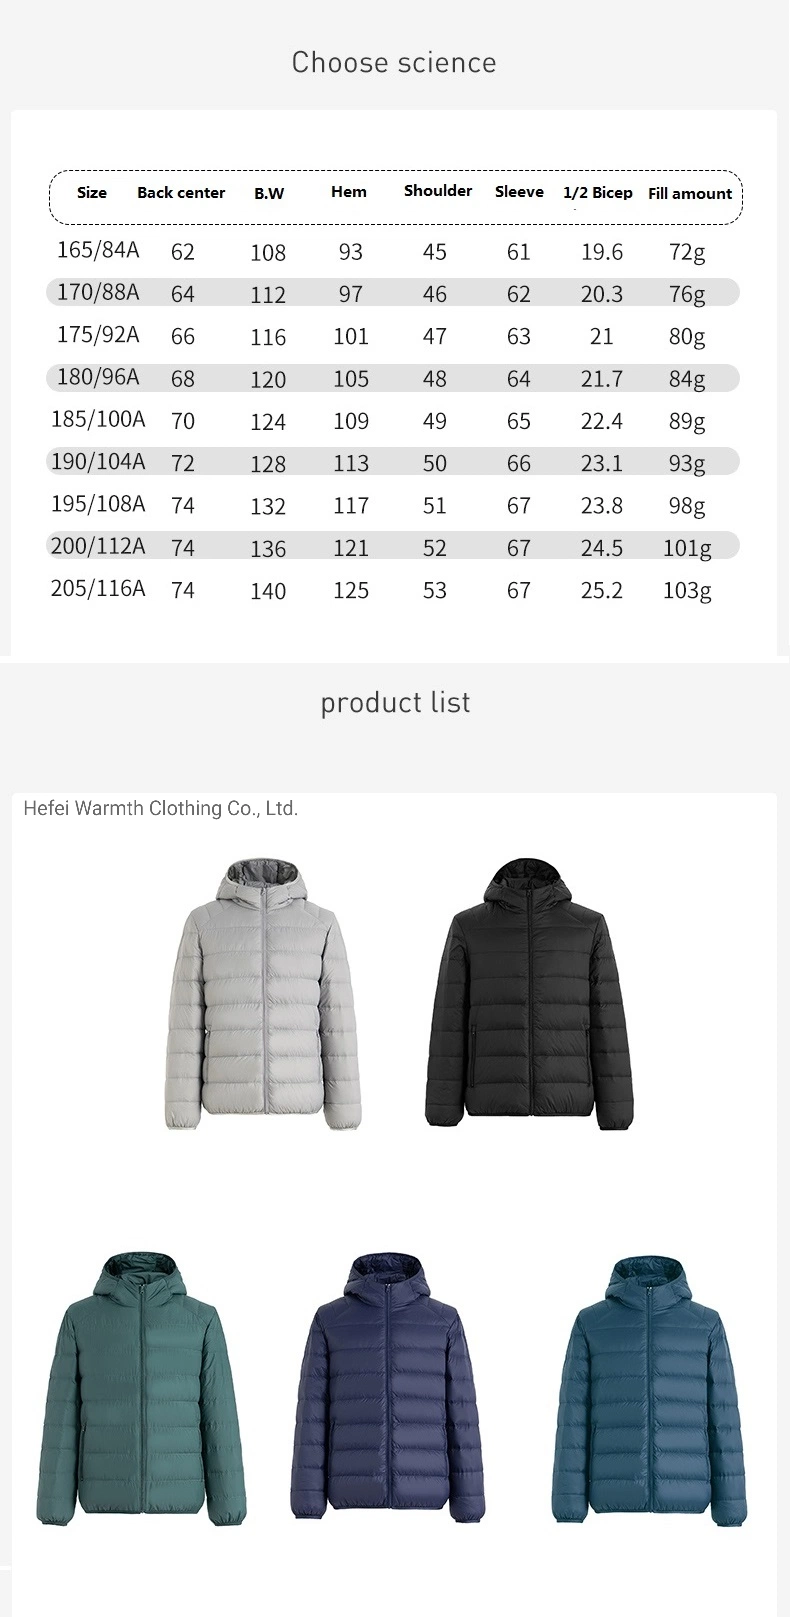 Clothing Manufacturers Winter High Quality Down Puffer Jacket Warm Hooded Zipper Eco Down Jacket